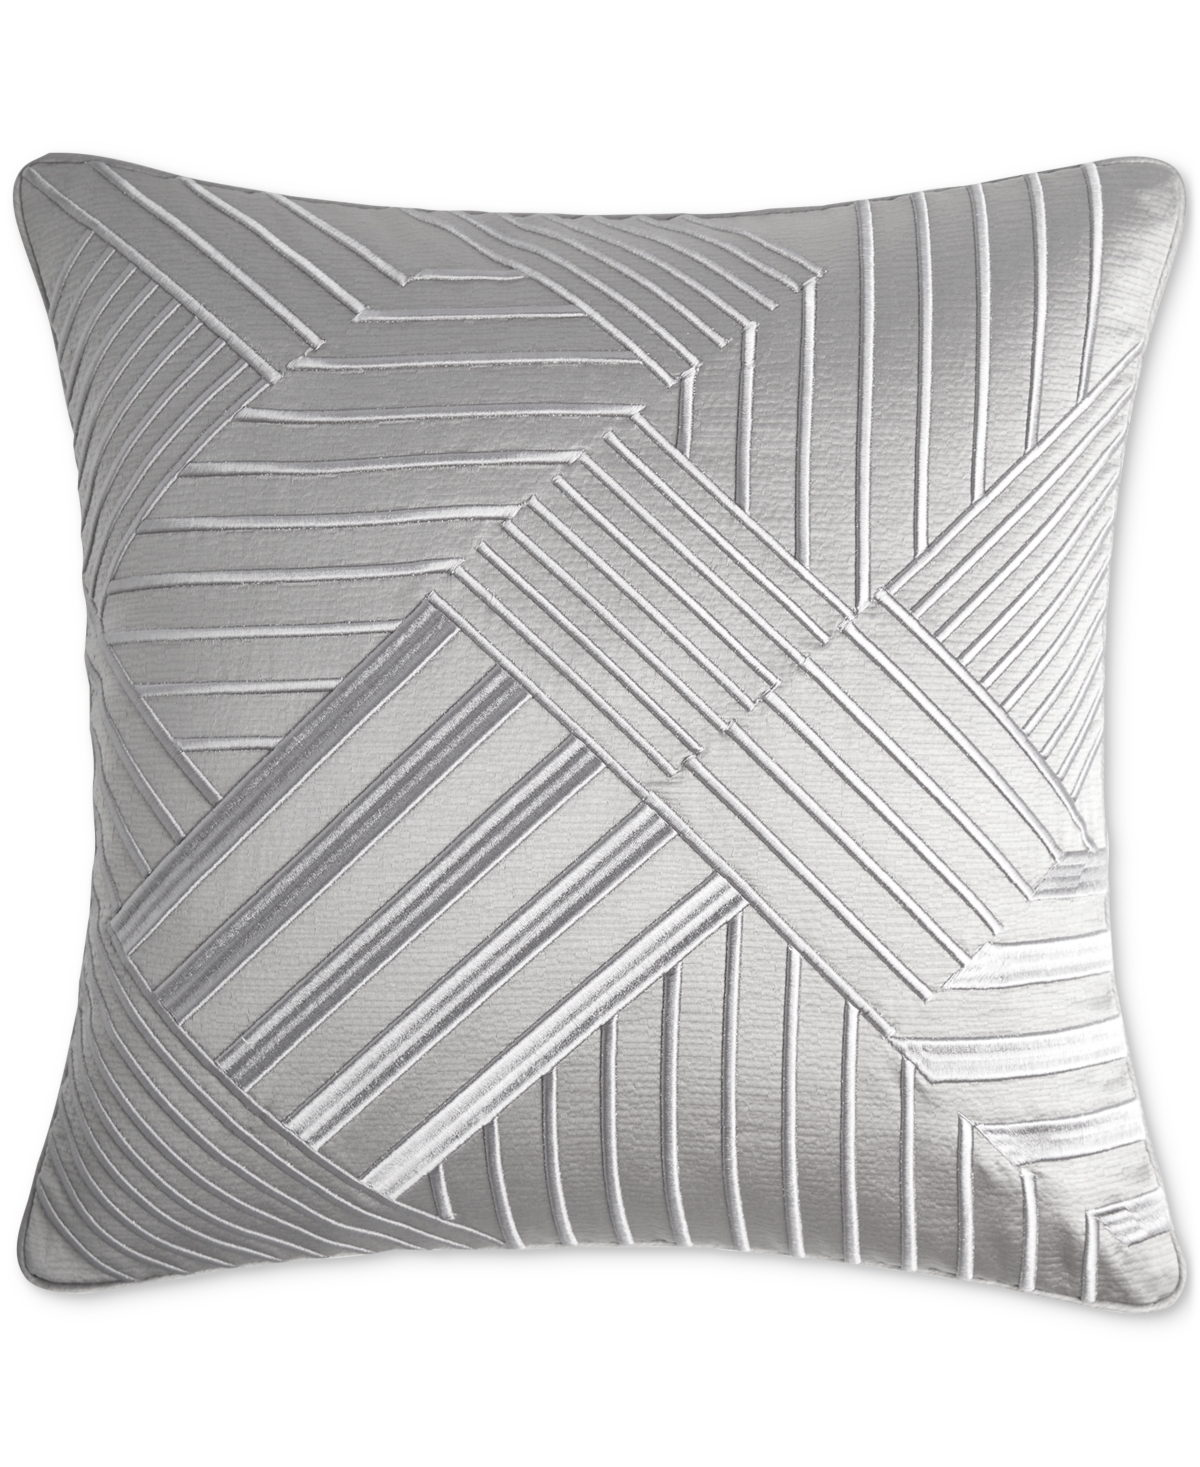 Hotel Collection Glint Decorative Pillow, 20" X 20", Created For Macy's In Charcoal